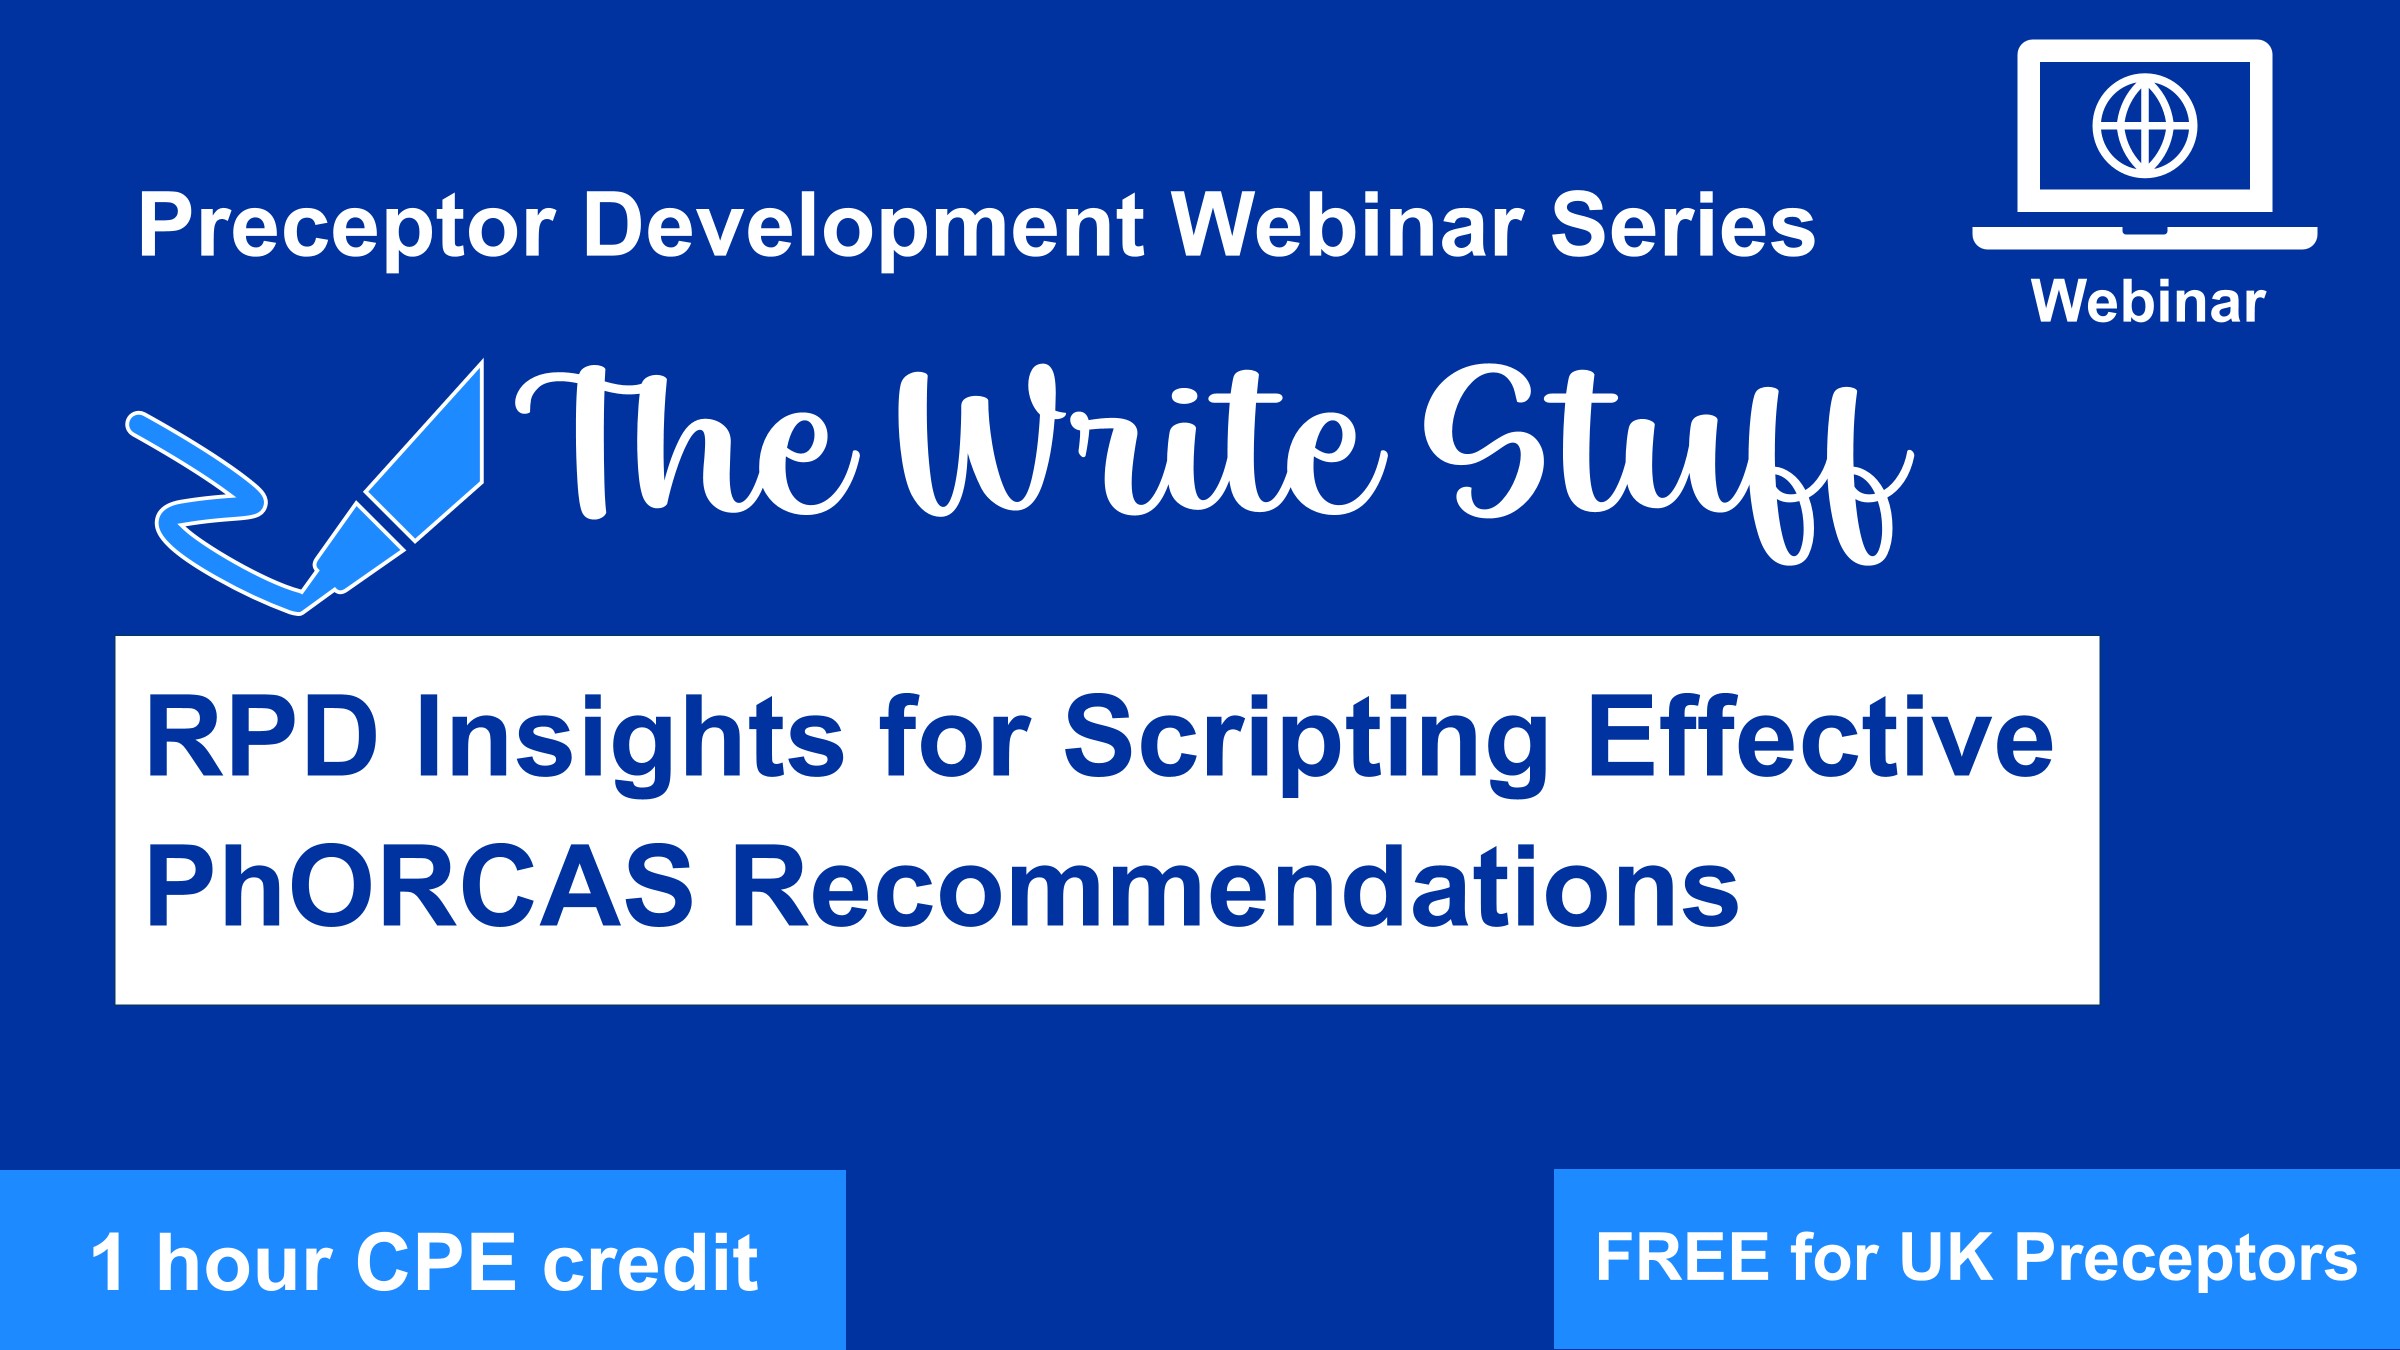 ON-DEMAND WEBINAR | The Write Stuff: RPD Insights for Scripting Effective PhORCAS Recommendations